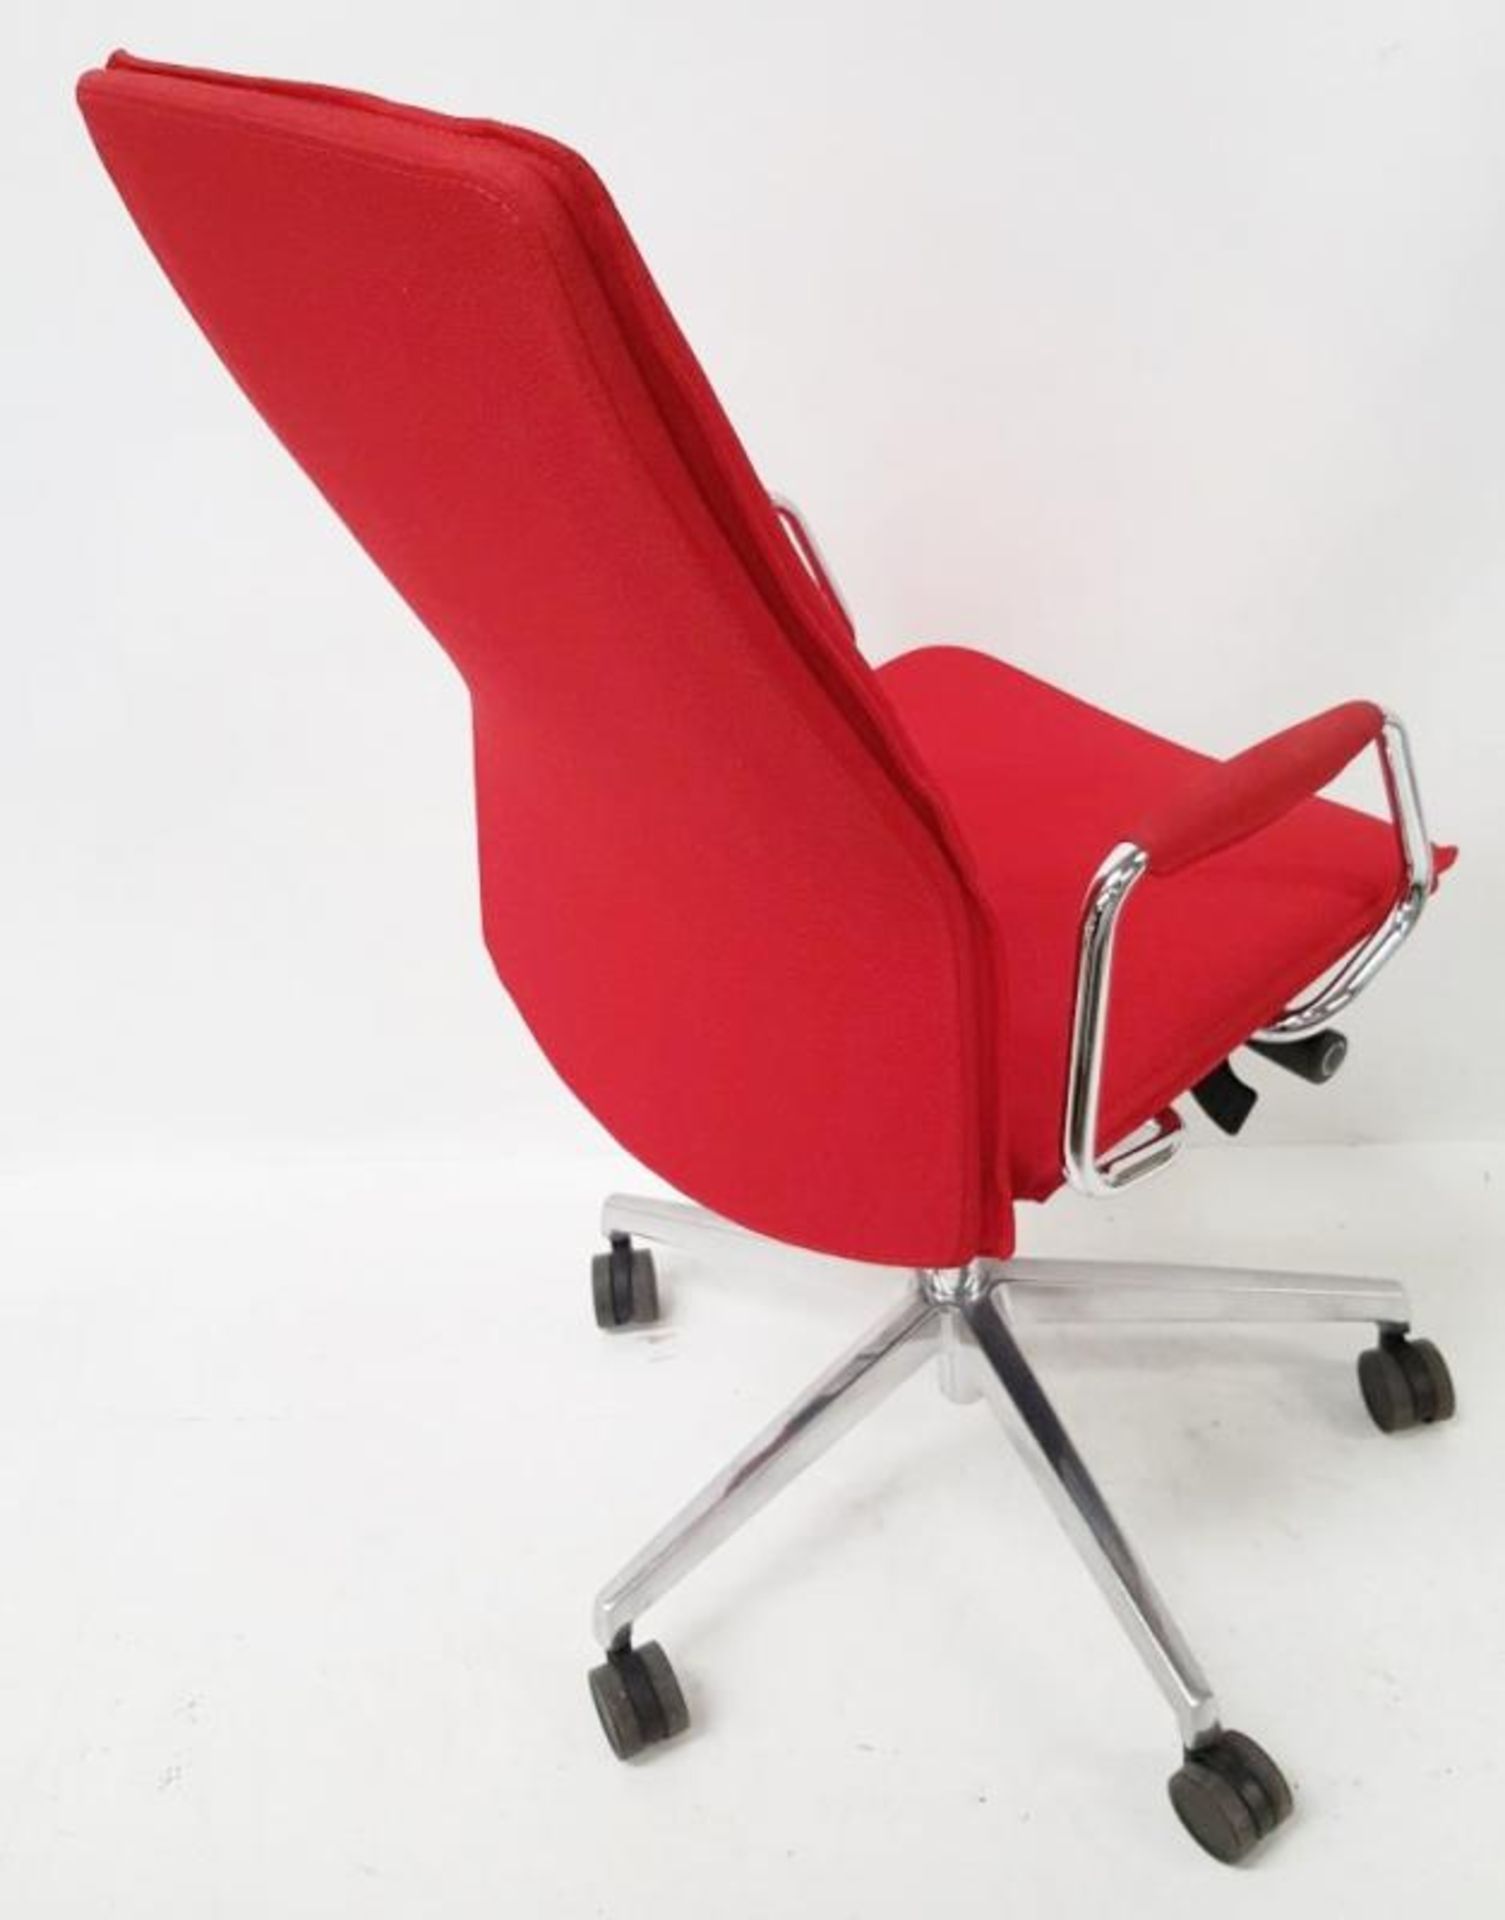 1 x 'Sven Christiansen' Premium Designer High-back Office Chair In Red (HBB1HA) - Used, In Very Good - Image 5 of 7